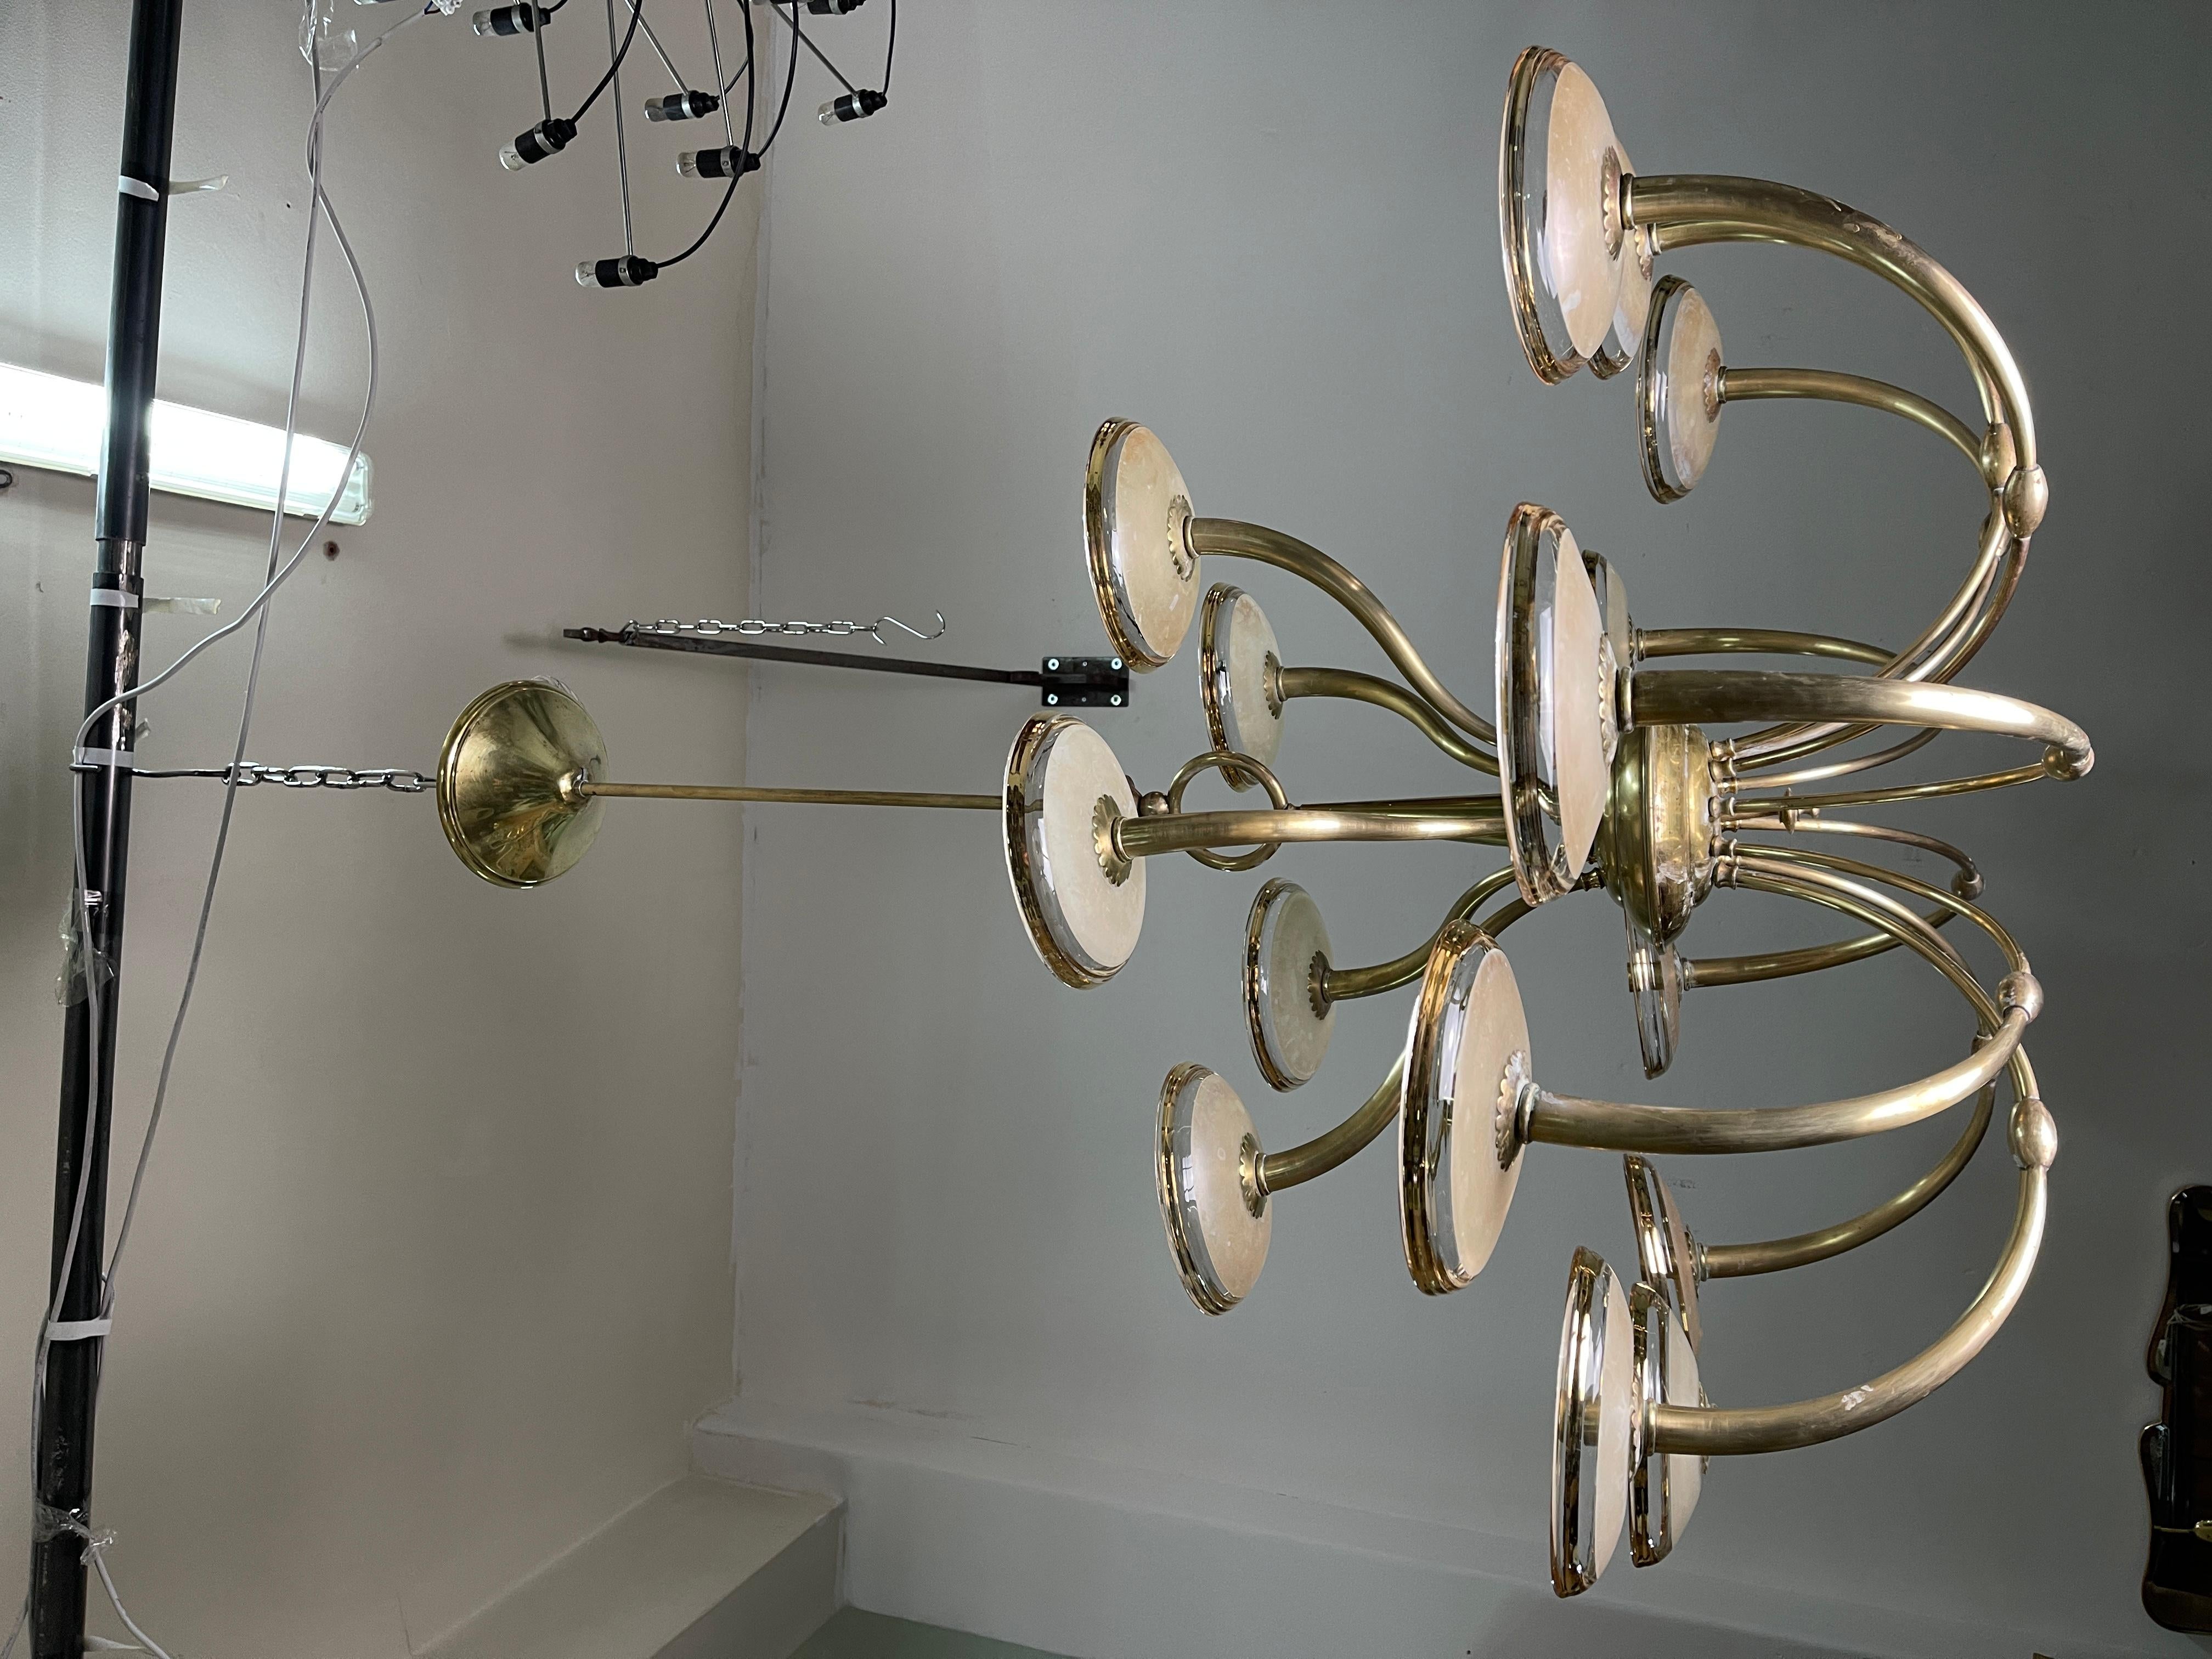 Brass chandelier 15 lights Italian production of the 1930s attributable to the designers Gio Ponti and Emilio Lancia.